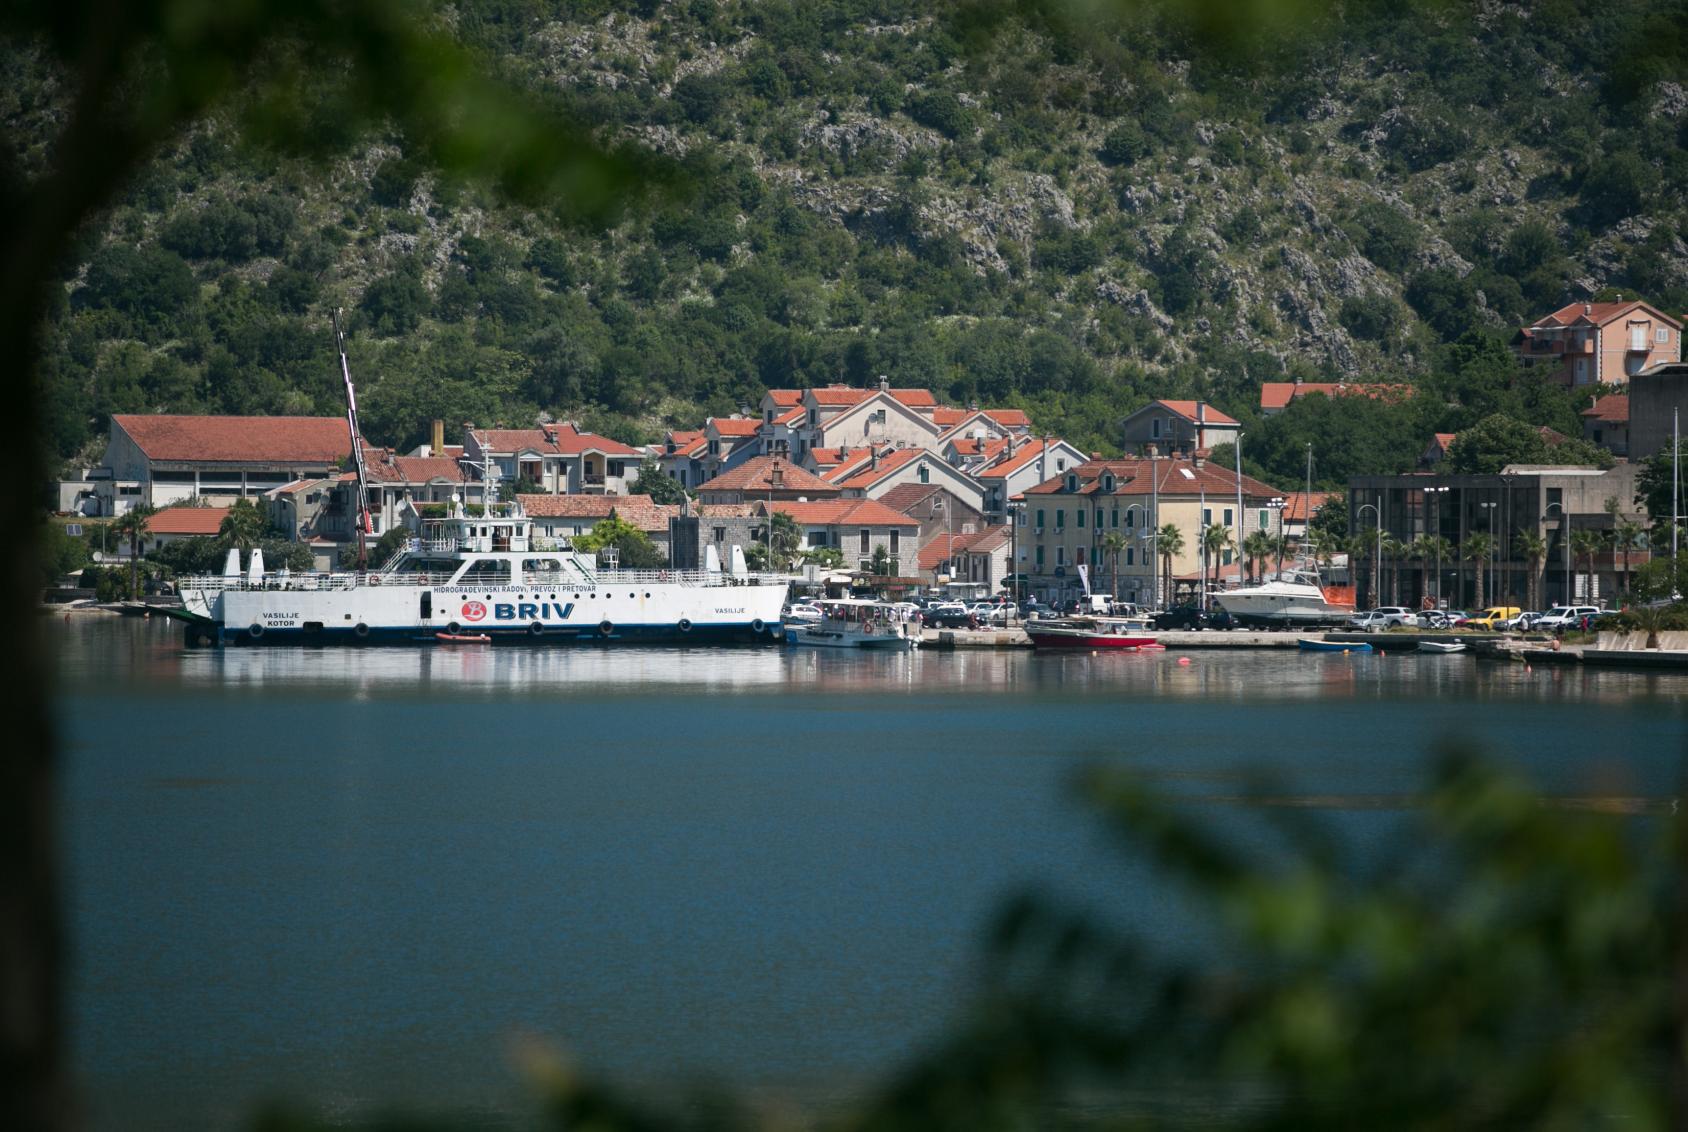 An image of a harbor with boats, buildings, and trees in the background.